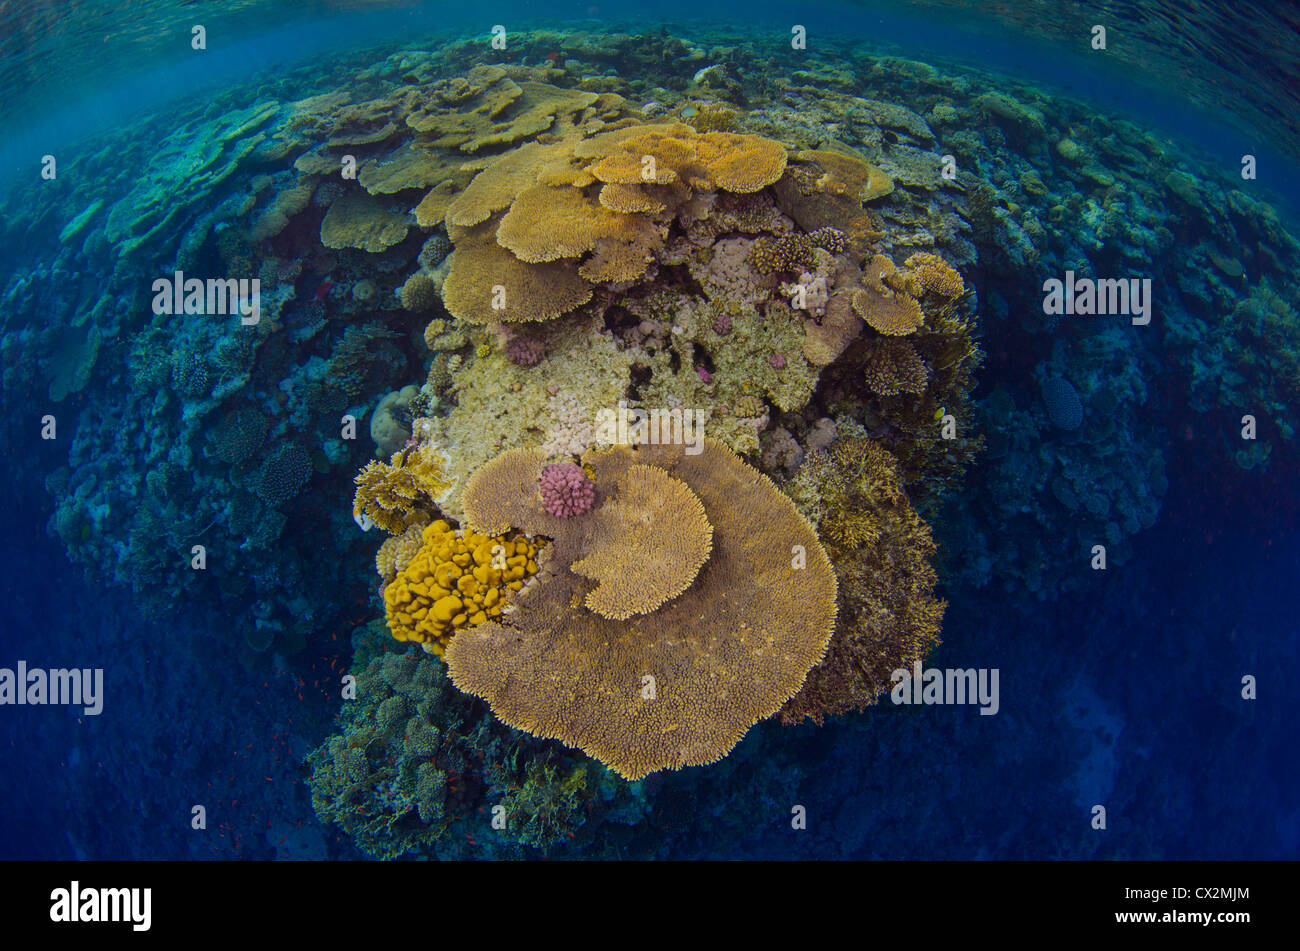 coral reef, Red Sea, Egypt, ocean, sea, shallow water, blue water, hard corals, coral, colorful, color, underwater, coral reef. Stock Photo